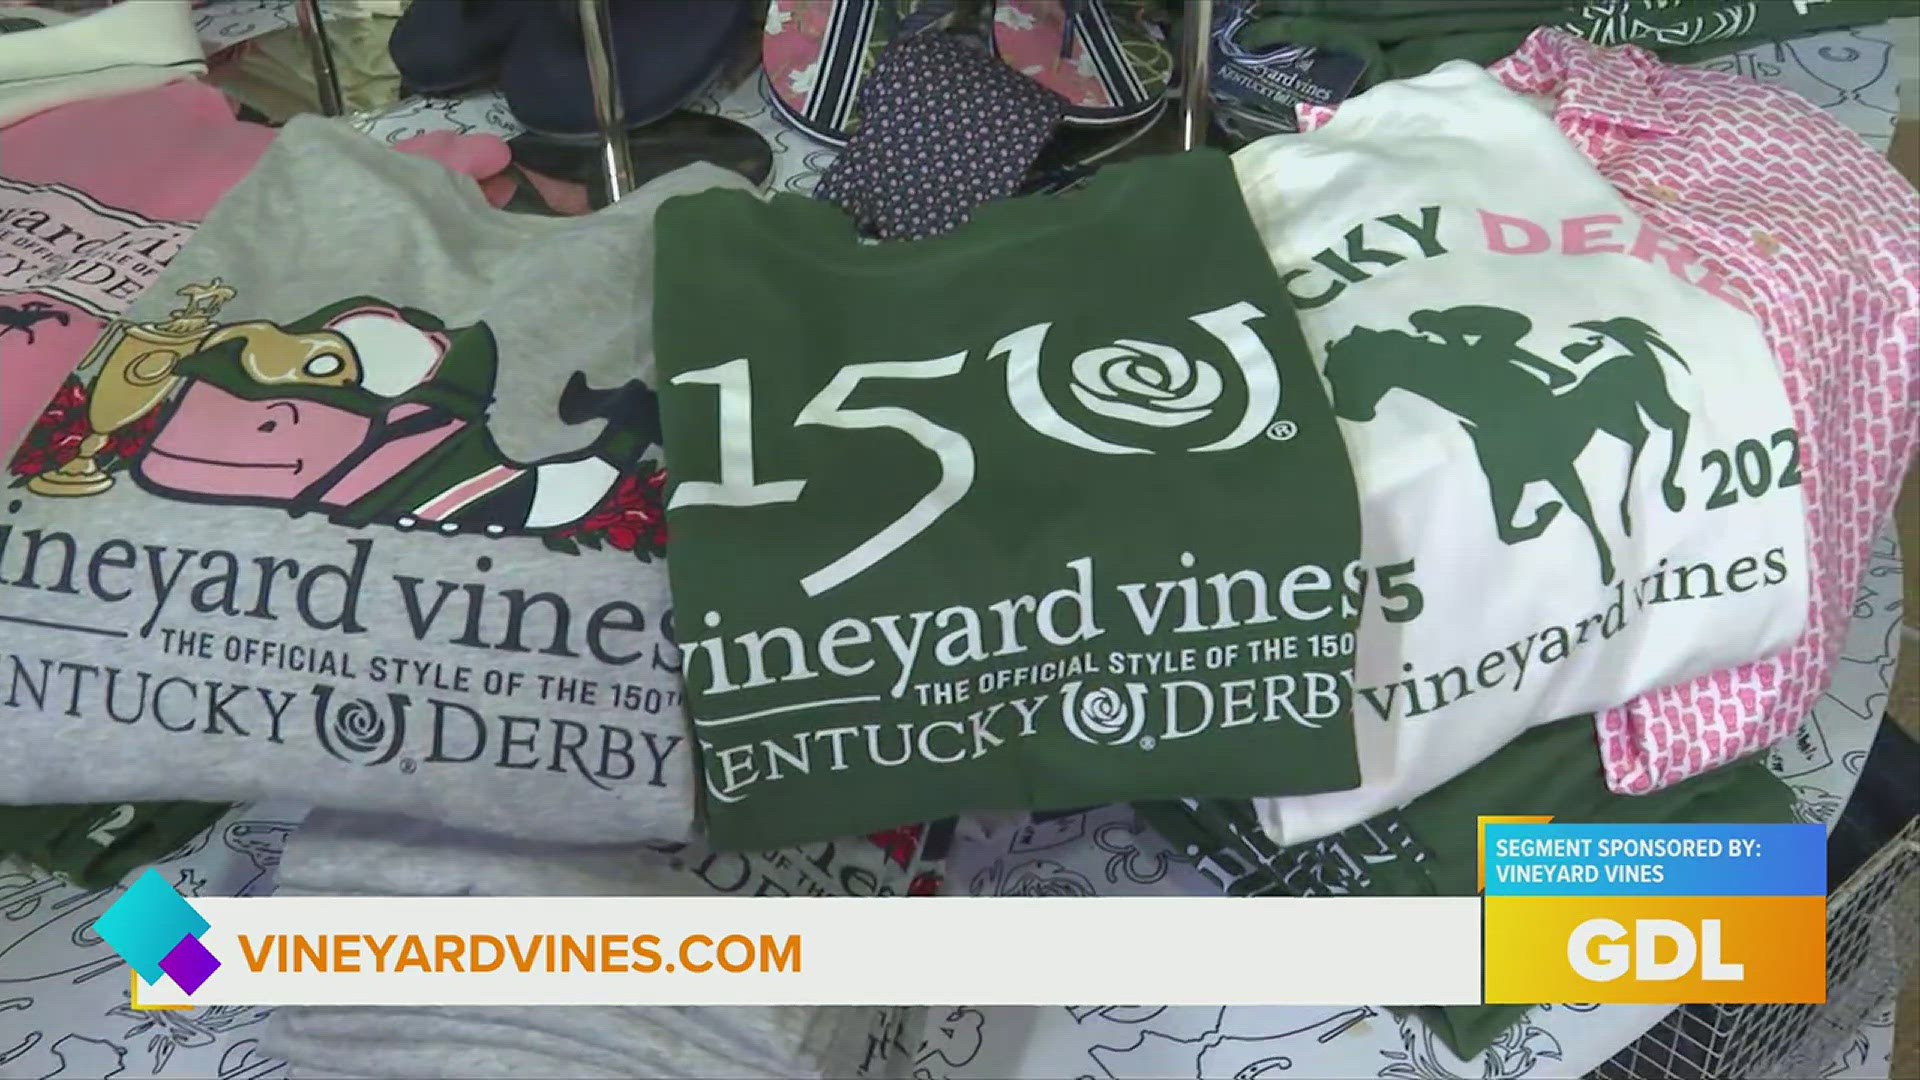 Check out Vineyard Vines and see their Derby collection at Churchill Downs.